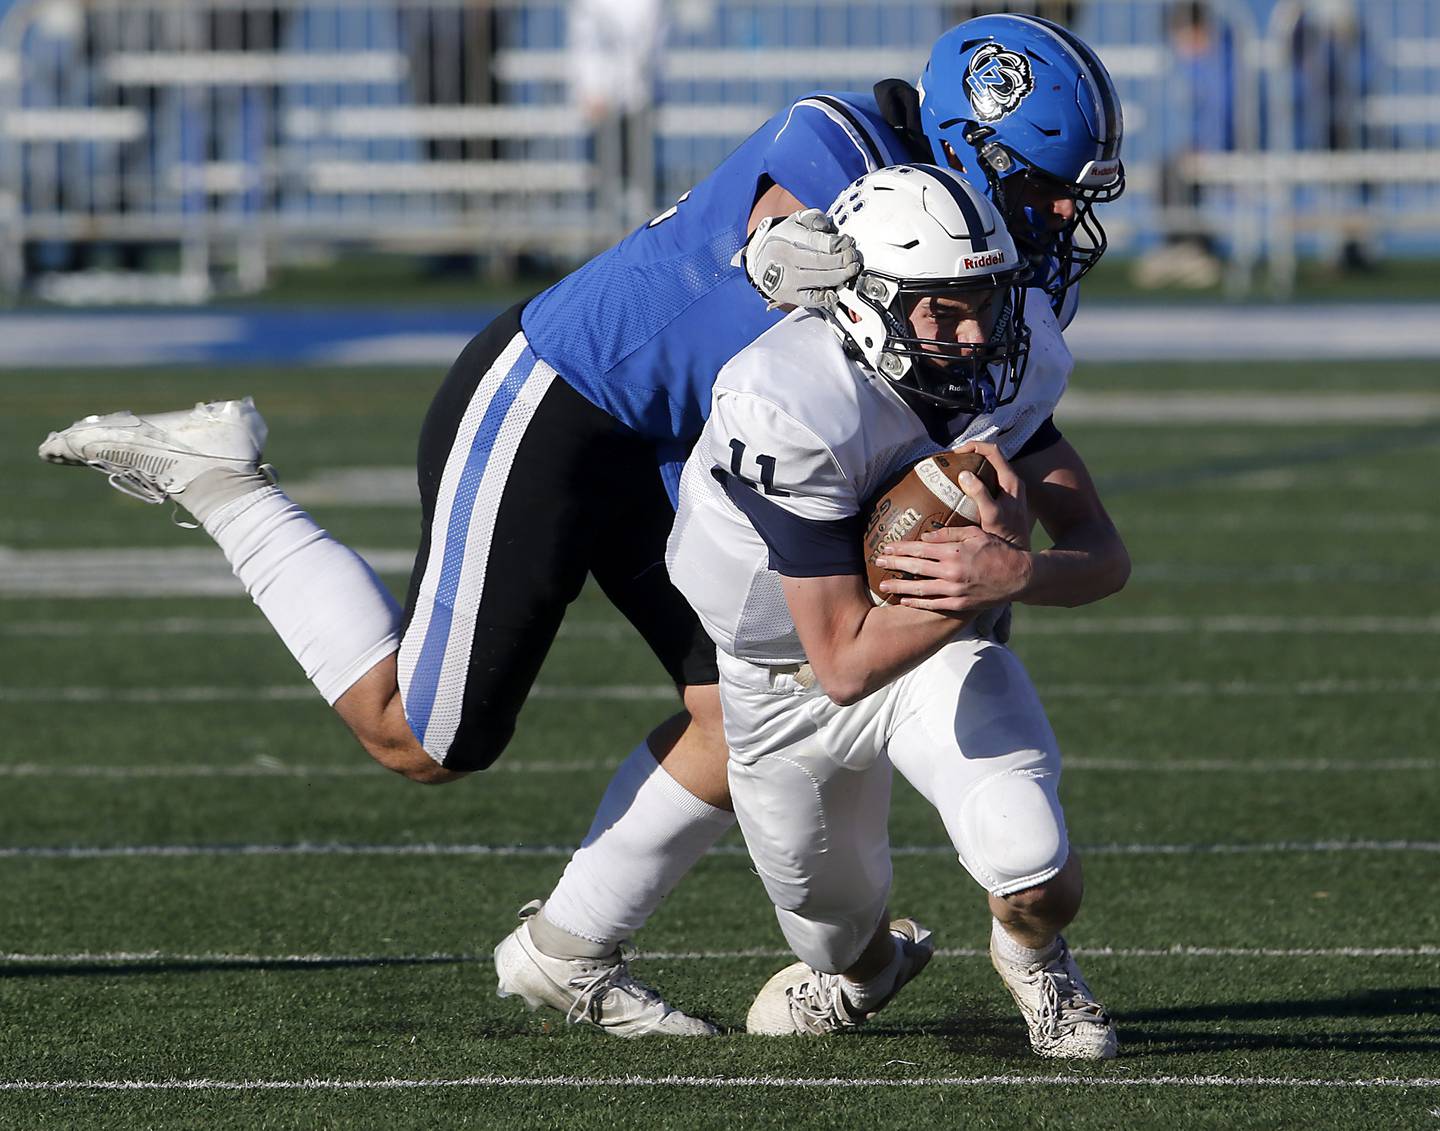 Cary-Grove's Peyton Seaburg runs for a first down on a fourth down play as Lake Zurich's George Dicanio tries to tackle him during a IHSA Class 6A semifinal playoff football game on Saturday, Nov. 18, 2023, at Lake Zurich High School.